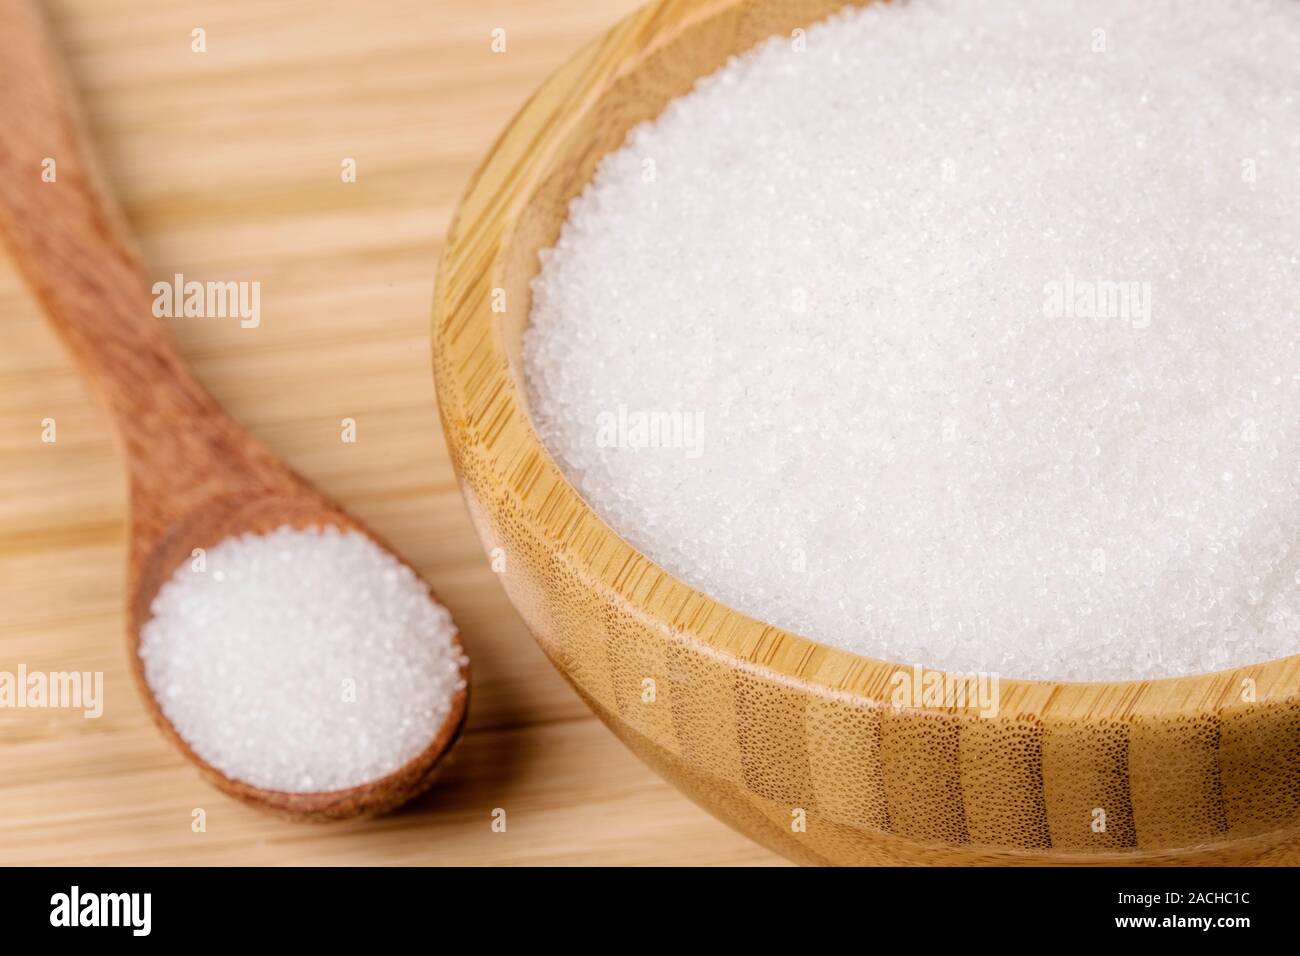 Wooden bowl full of granulated sugar with a wooden spoon on a wooden background Stock Photo